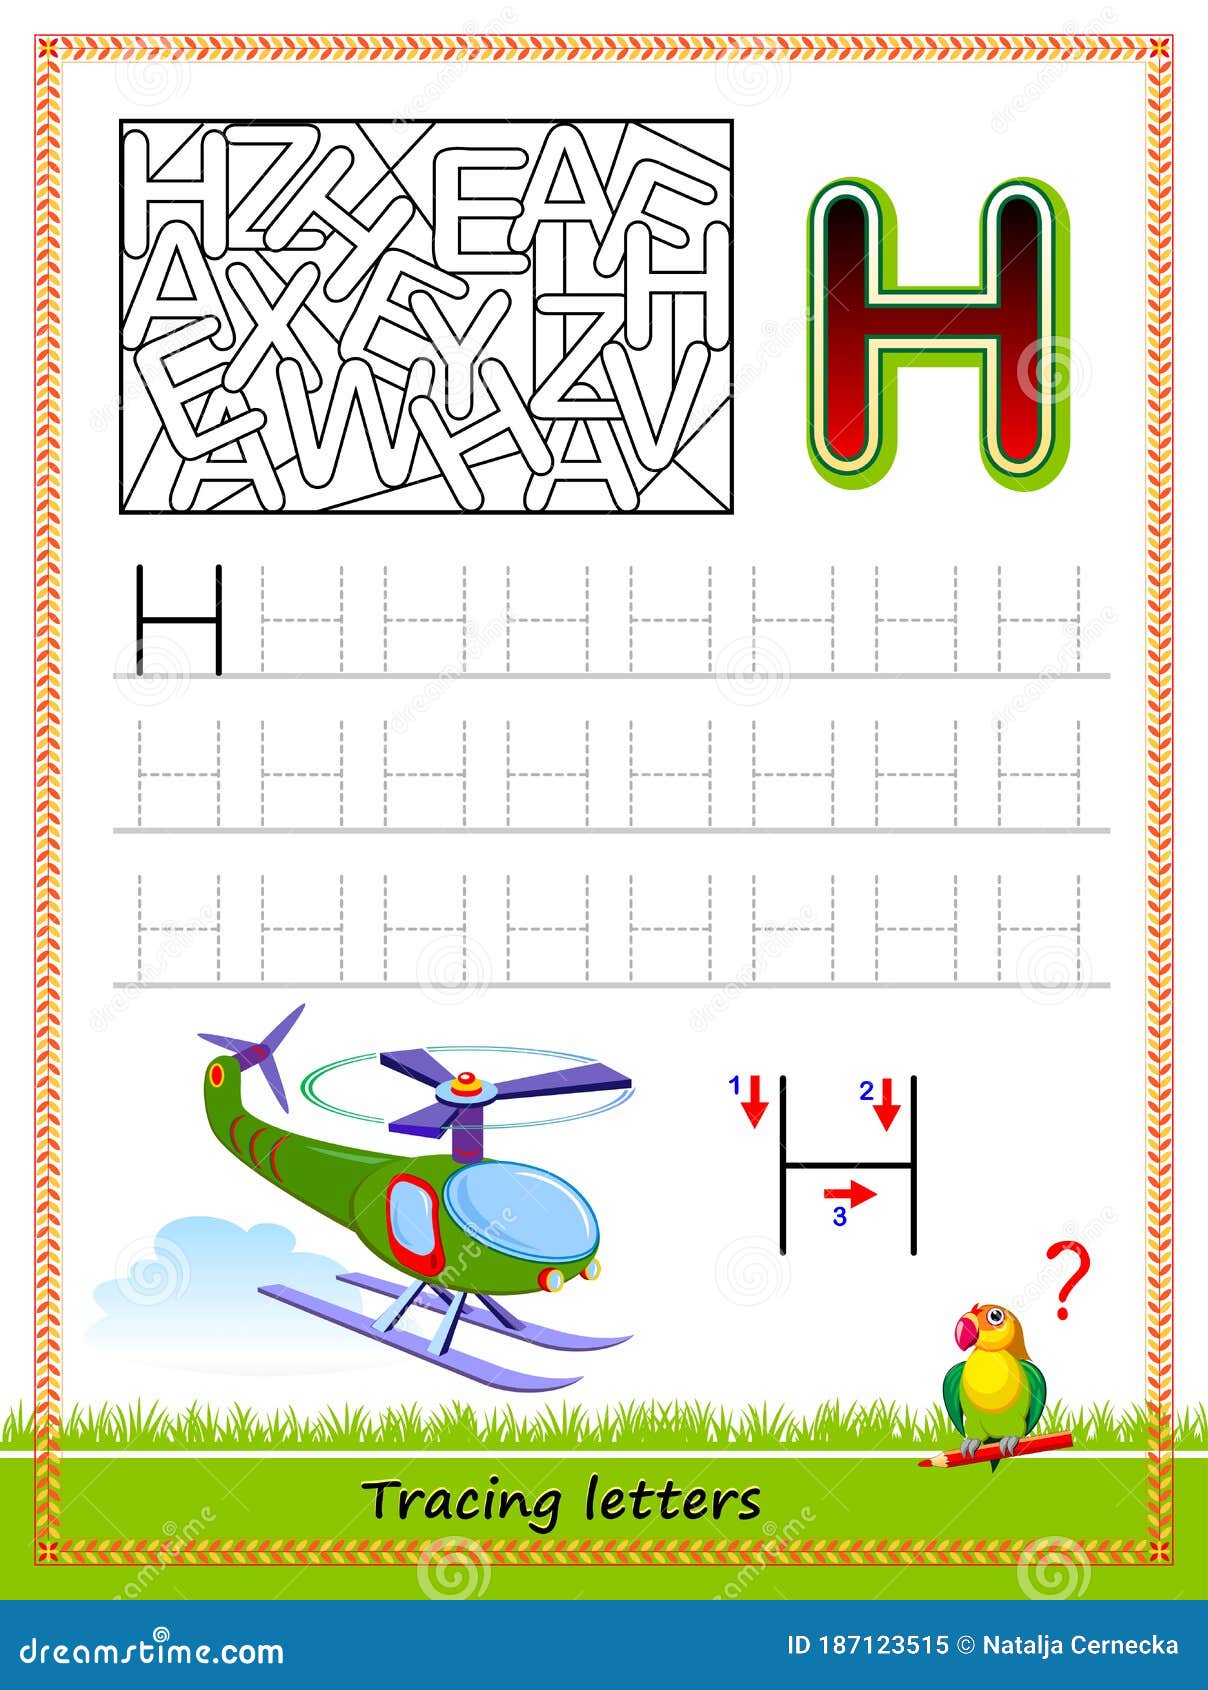 Worksheet for tracing letters find and paint all letters h kids activity sheet educational page for children coloring book stock vector